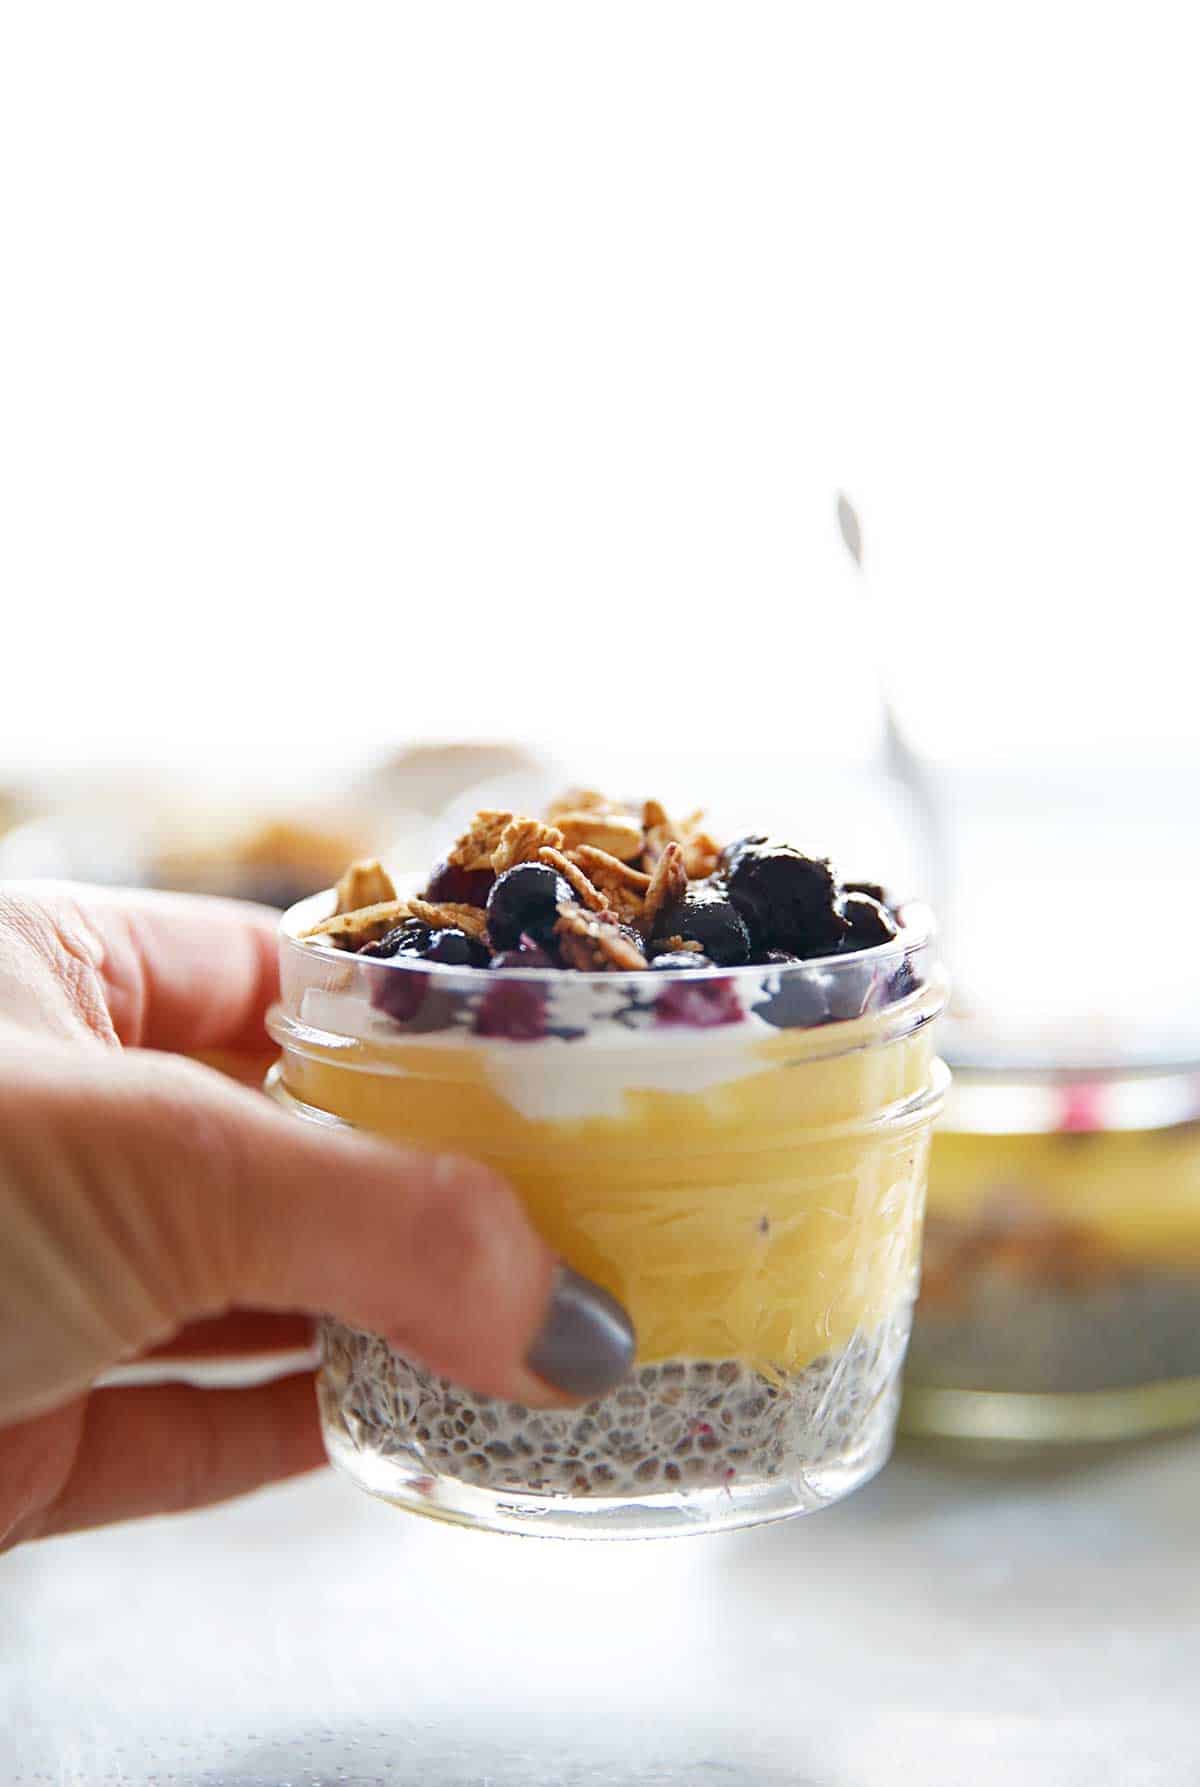 Layers of Lemon and blueberry breakfast parfaits in a jar.